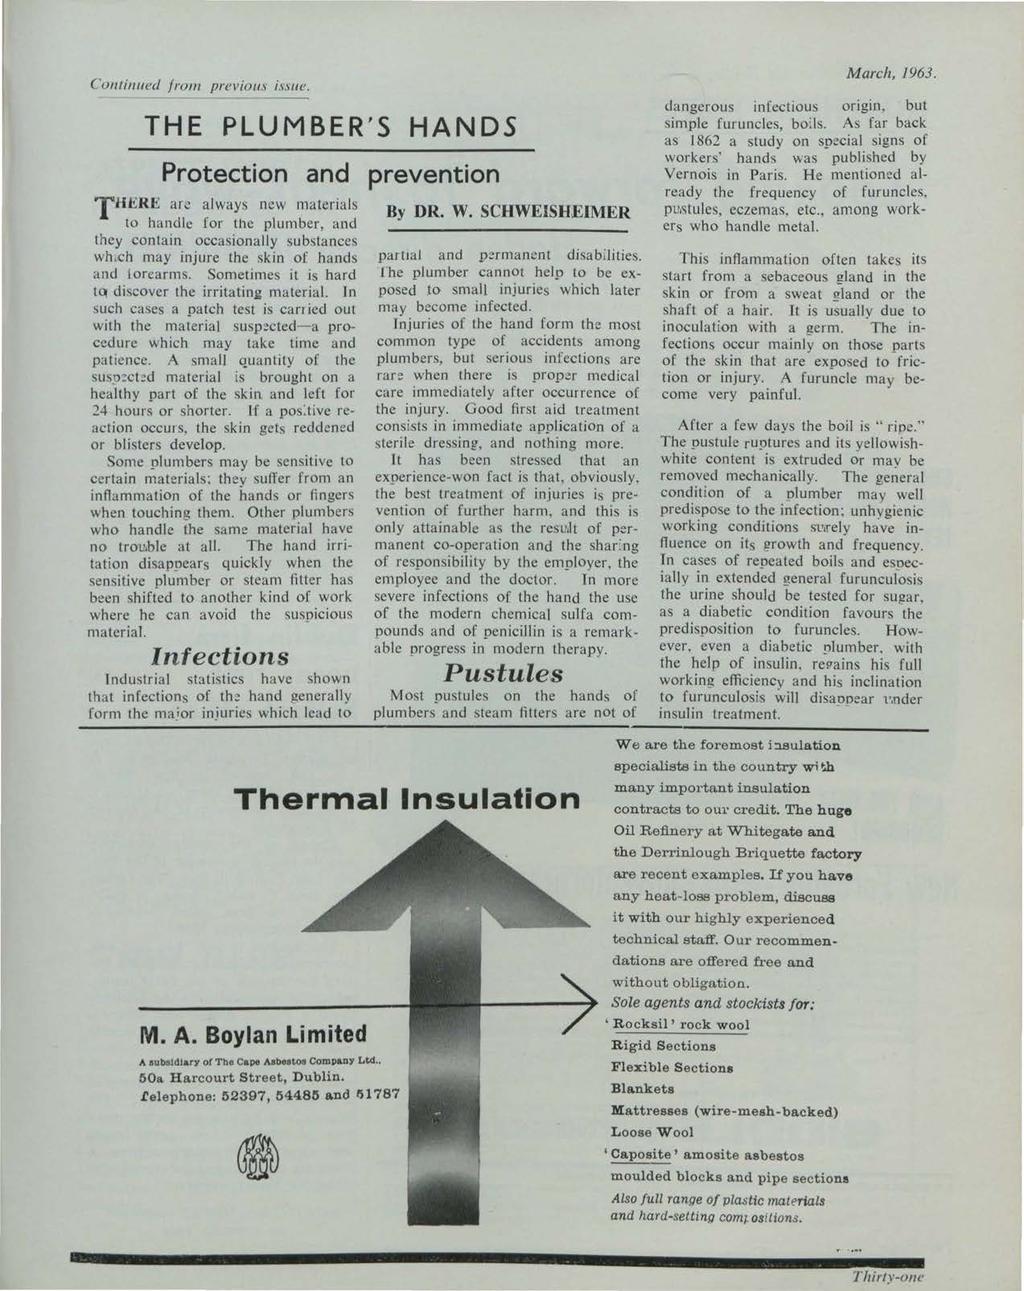 et al.: The Irish Plumber and Heating Contractor, March 1963 (complete is Continued /roll/ previou.1 issue.